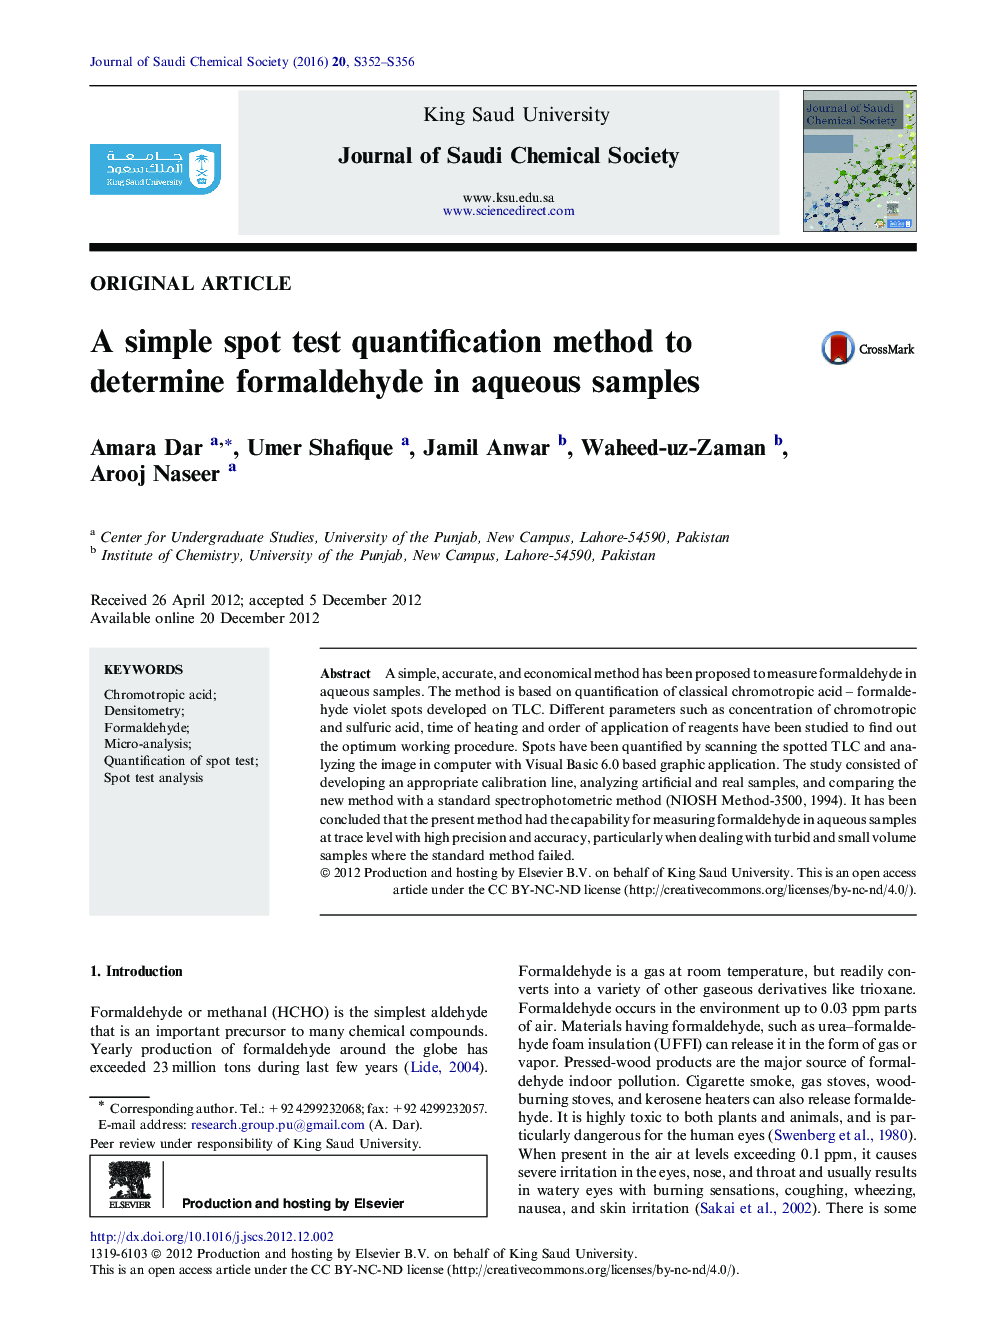 A simple spot test quantification method to determine formaldehyde in aqueous samples